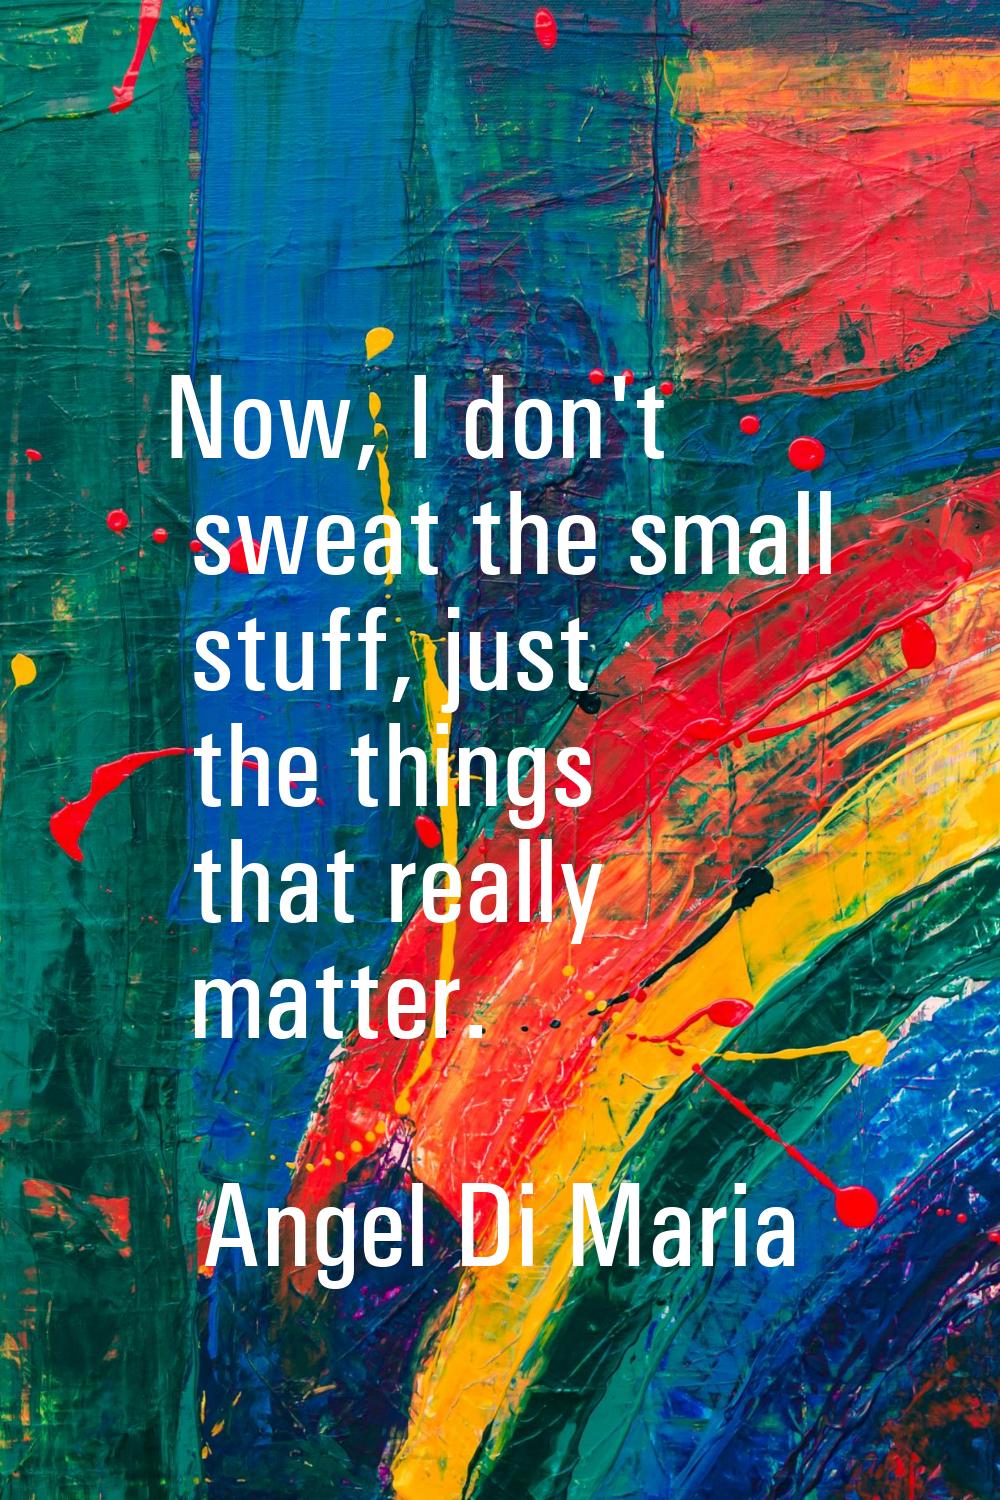 Now, I don't sweat the small stuff, just the things that really matter.